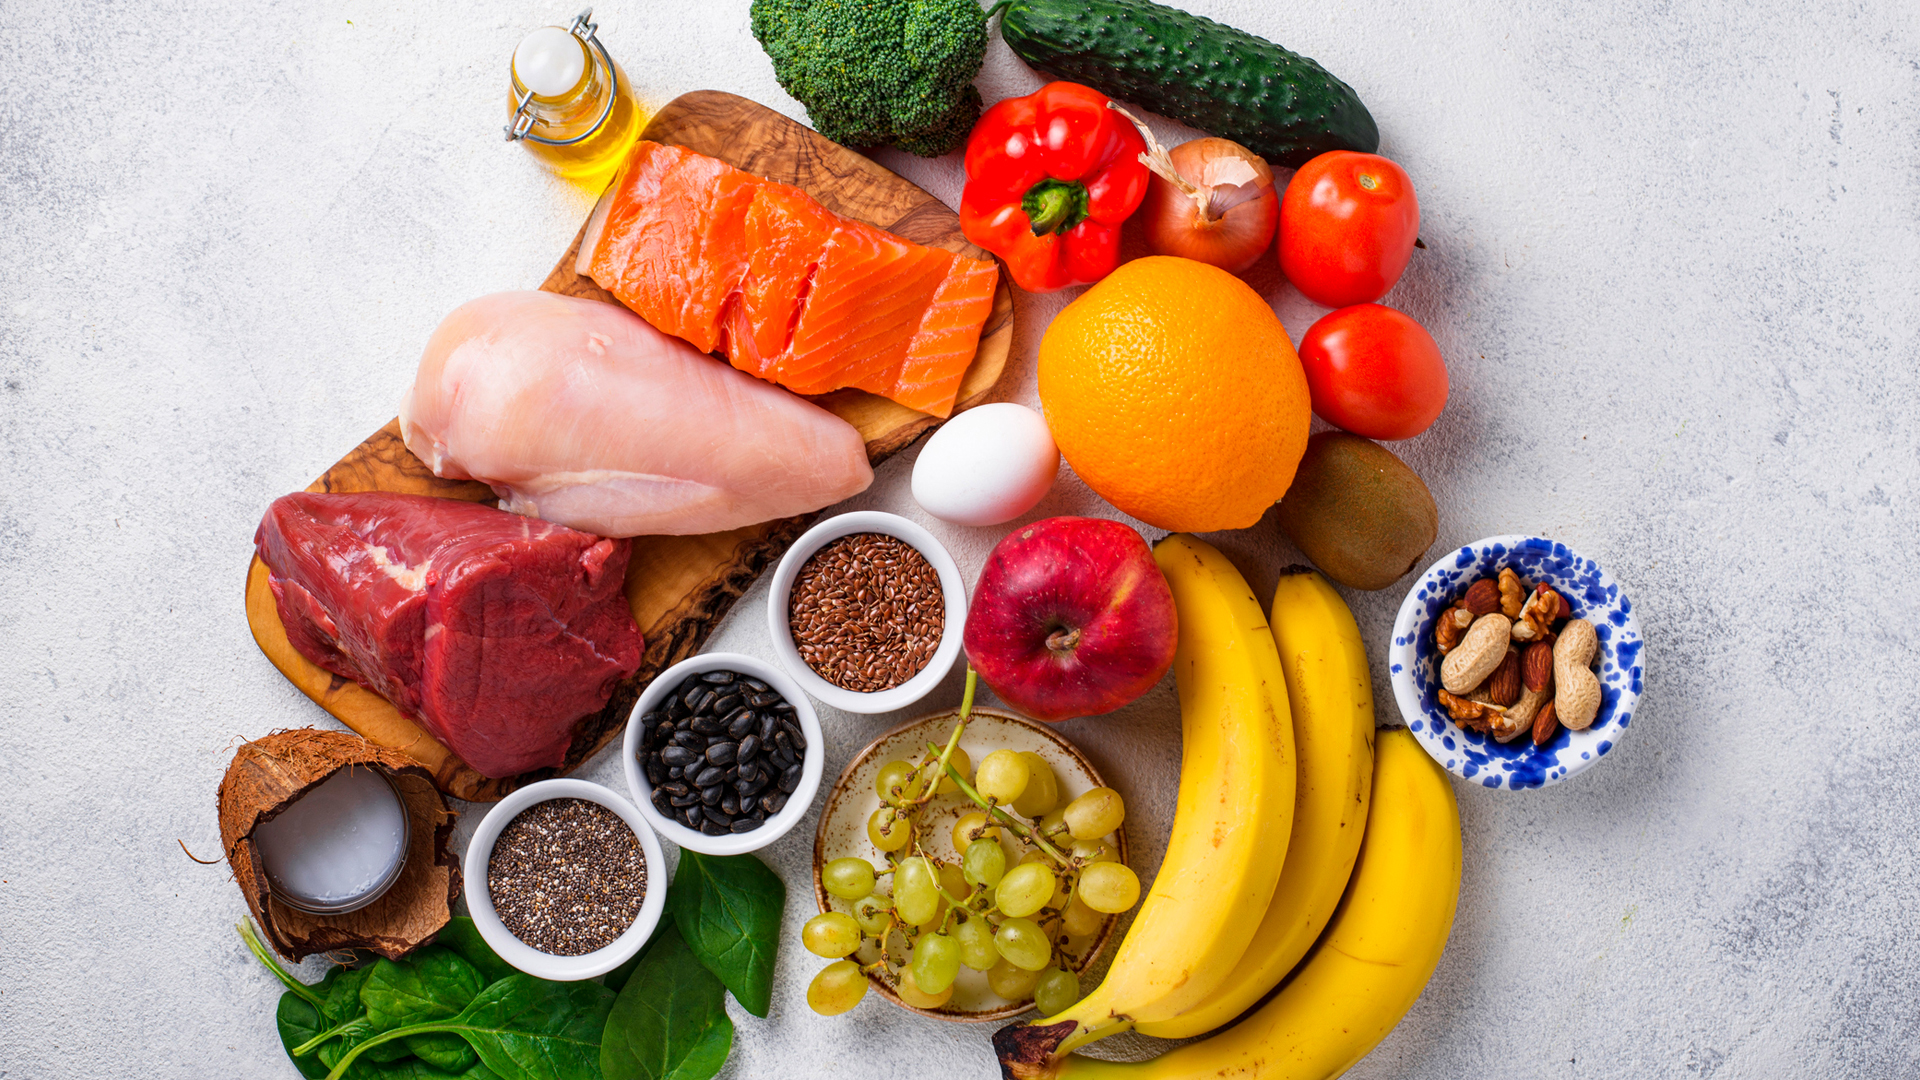 The Whole30 Diet Uncovered: Does It Deliver Real Results? - Nutrisense  Journal